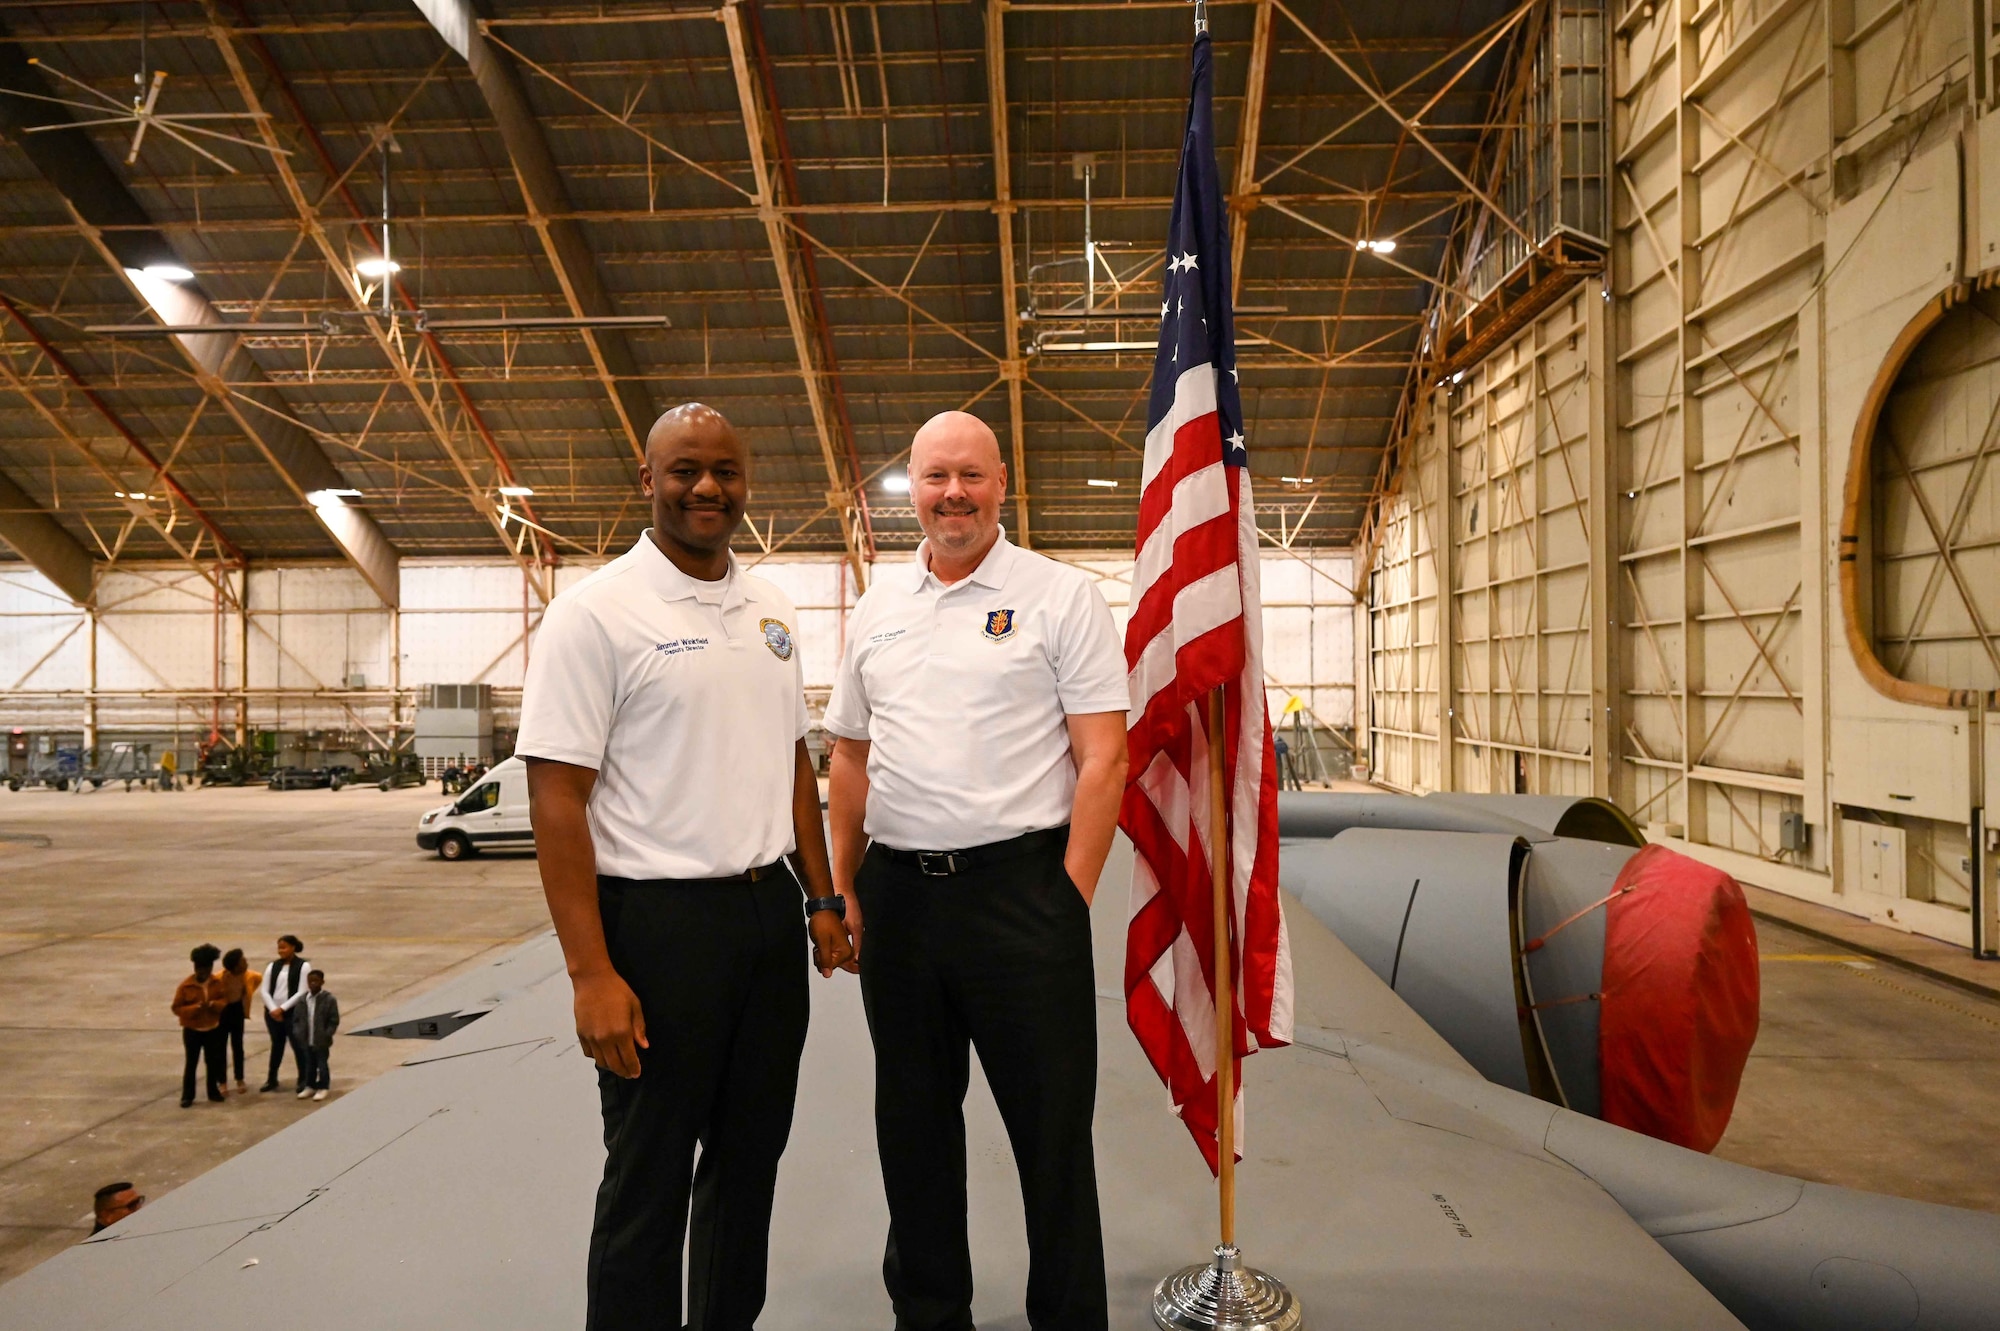 Jimmel Winkfield, left, 97th Aircraft Maintenance Squadron deputy director, poses with Travis Coughlin, 97th Maintenance Group deputy director, on the wing of a KC-135 Stratotanker at Altus Air Force Base, Oklahoma, Dec. 28, 2023. Coughlin counts it as a point of pride that he has administered the oath of enlistment to several Airmen who have moved from enlisted to officer. (U.S. Air Force photo by Airman 1st Class Kari Degraffenreed)